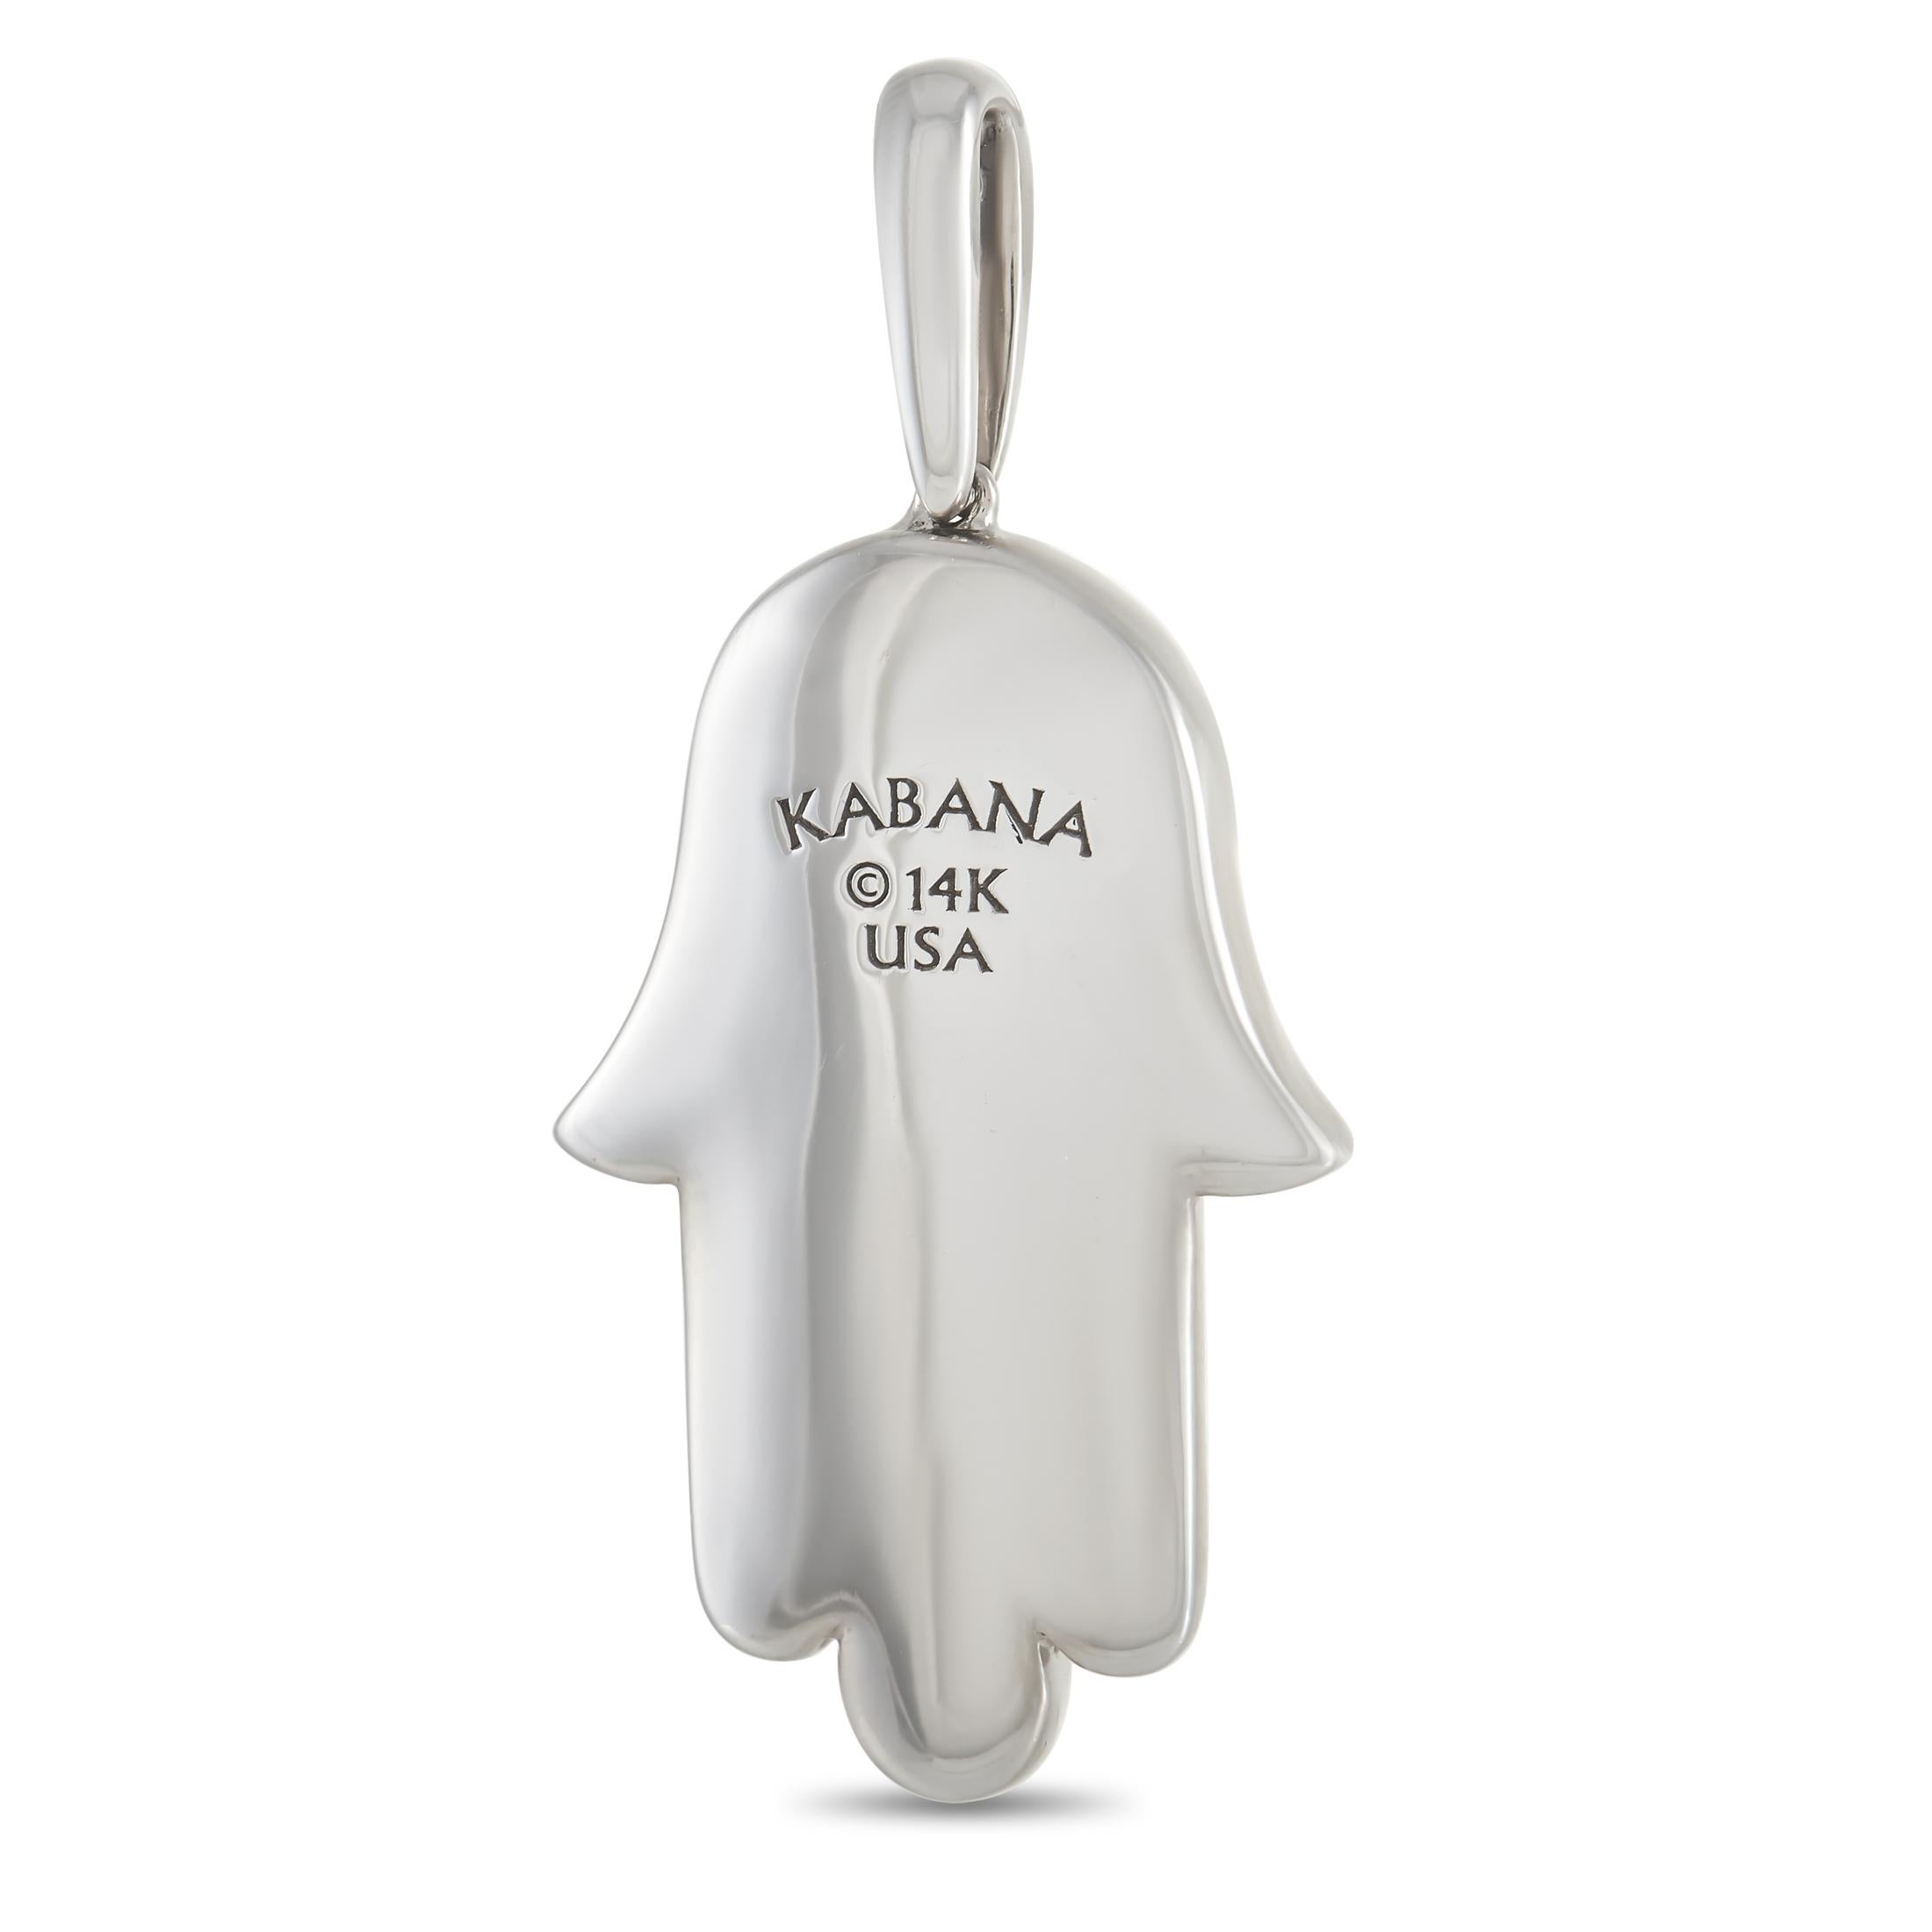 The traditional Hamsa gets an elegant upgrade on this exquisite Kabana pendant. Mother of Pearl accents pair perfectly with the stylish 14K White Gold setting, while diamonds totaling 0.33 carats add extra sparkle. It measures 1.75” long and .75”